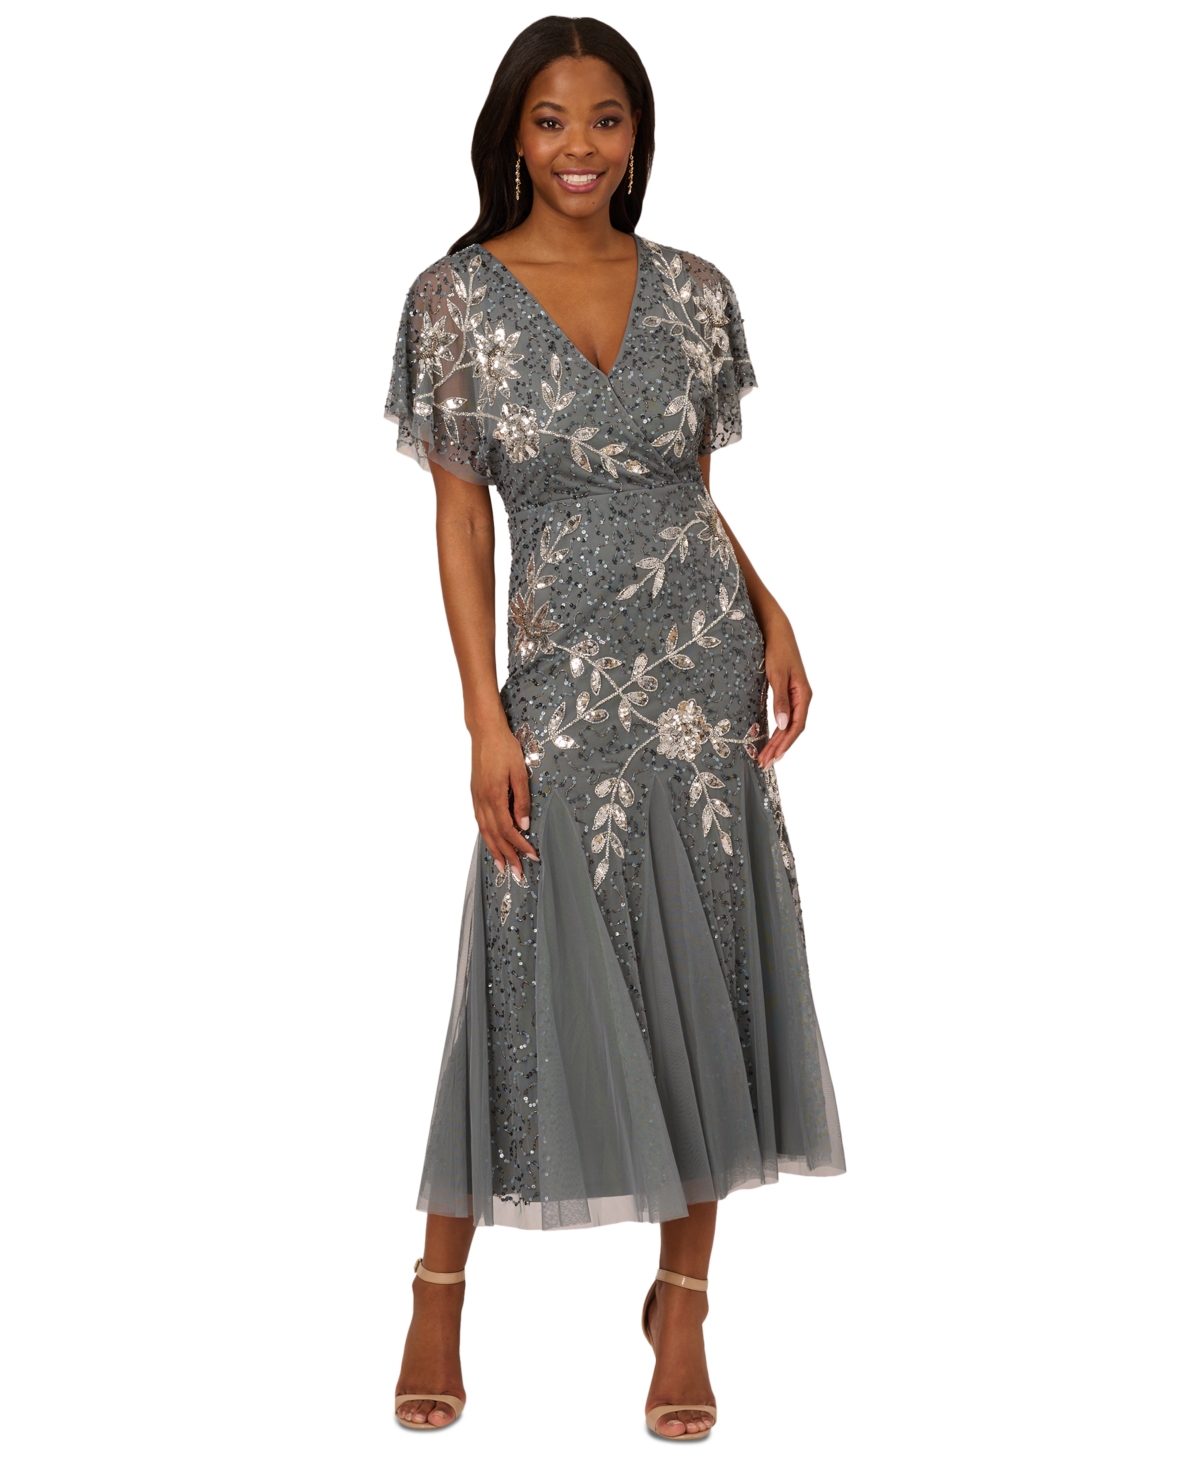 Women's Embellished Capelet-Sleeve Party Dress - Pewter Silver